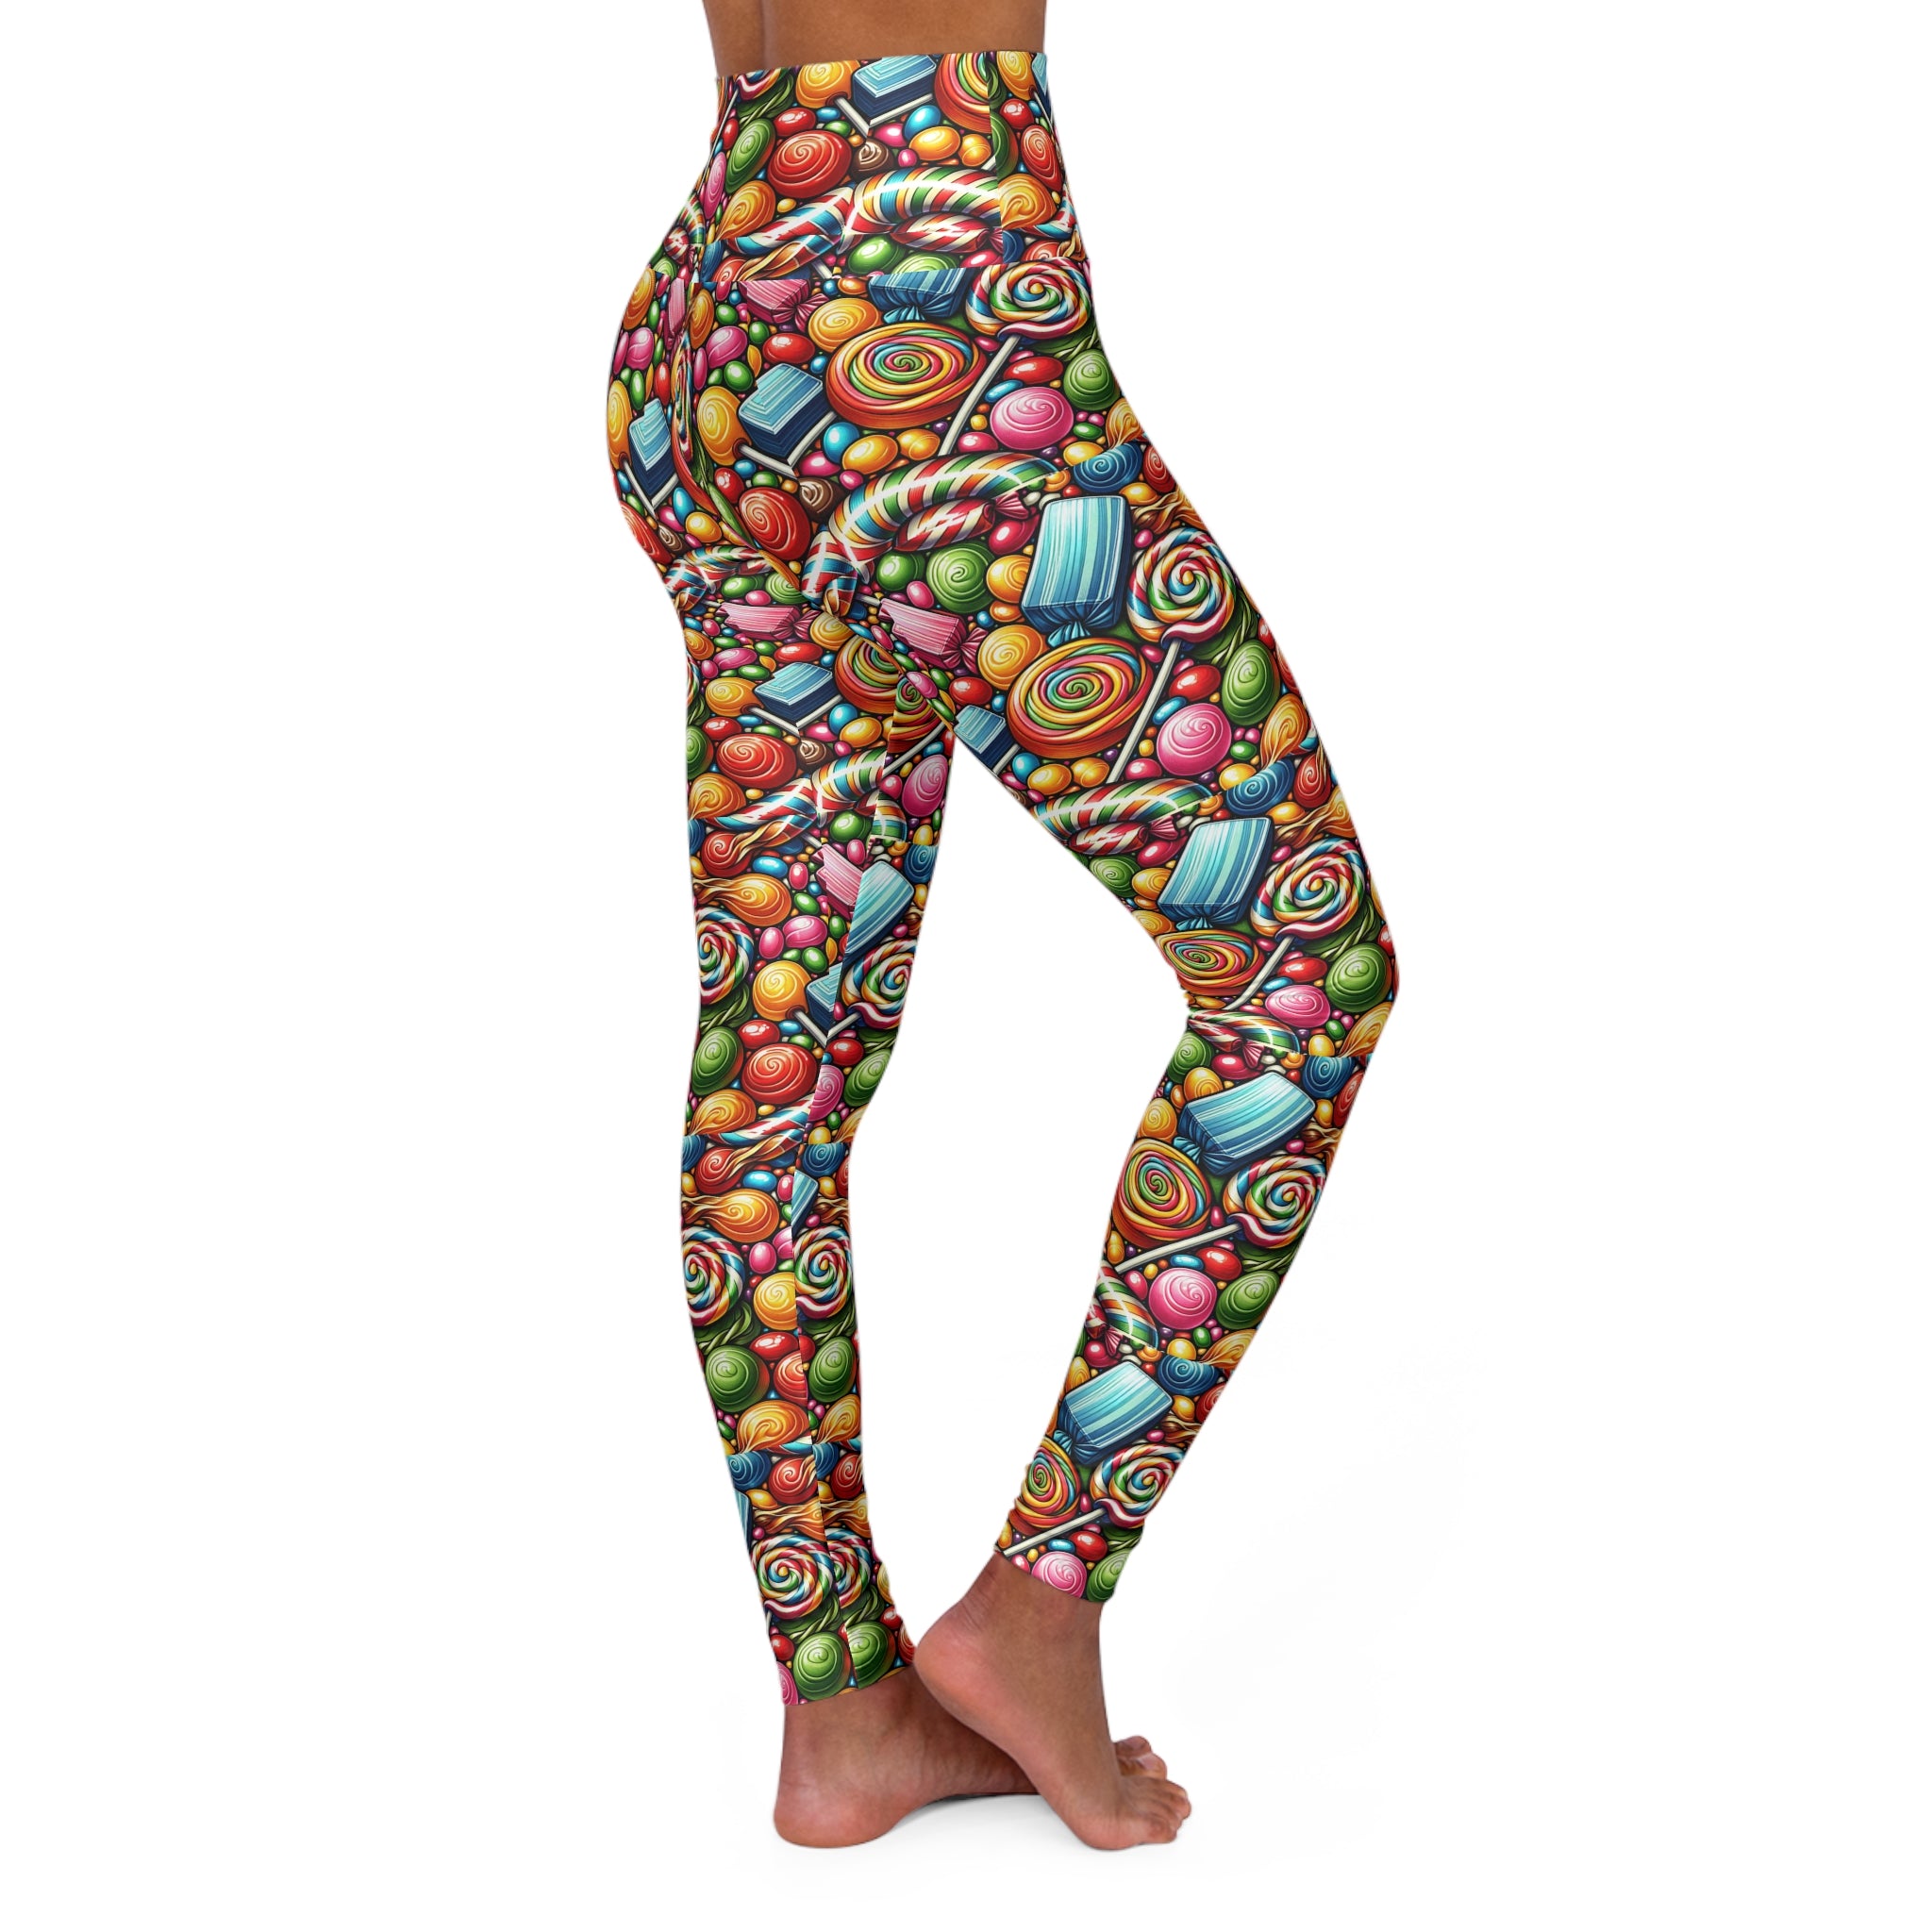 Colorful Candies Gym Leggings for Women S-2XL - Vibrant & Supportive